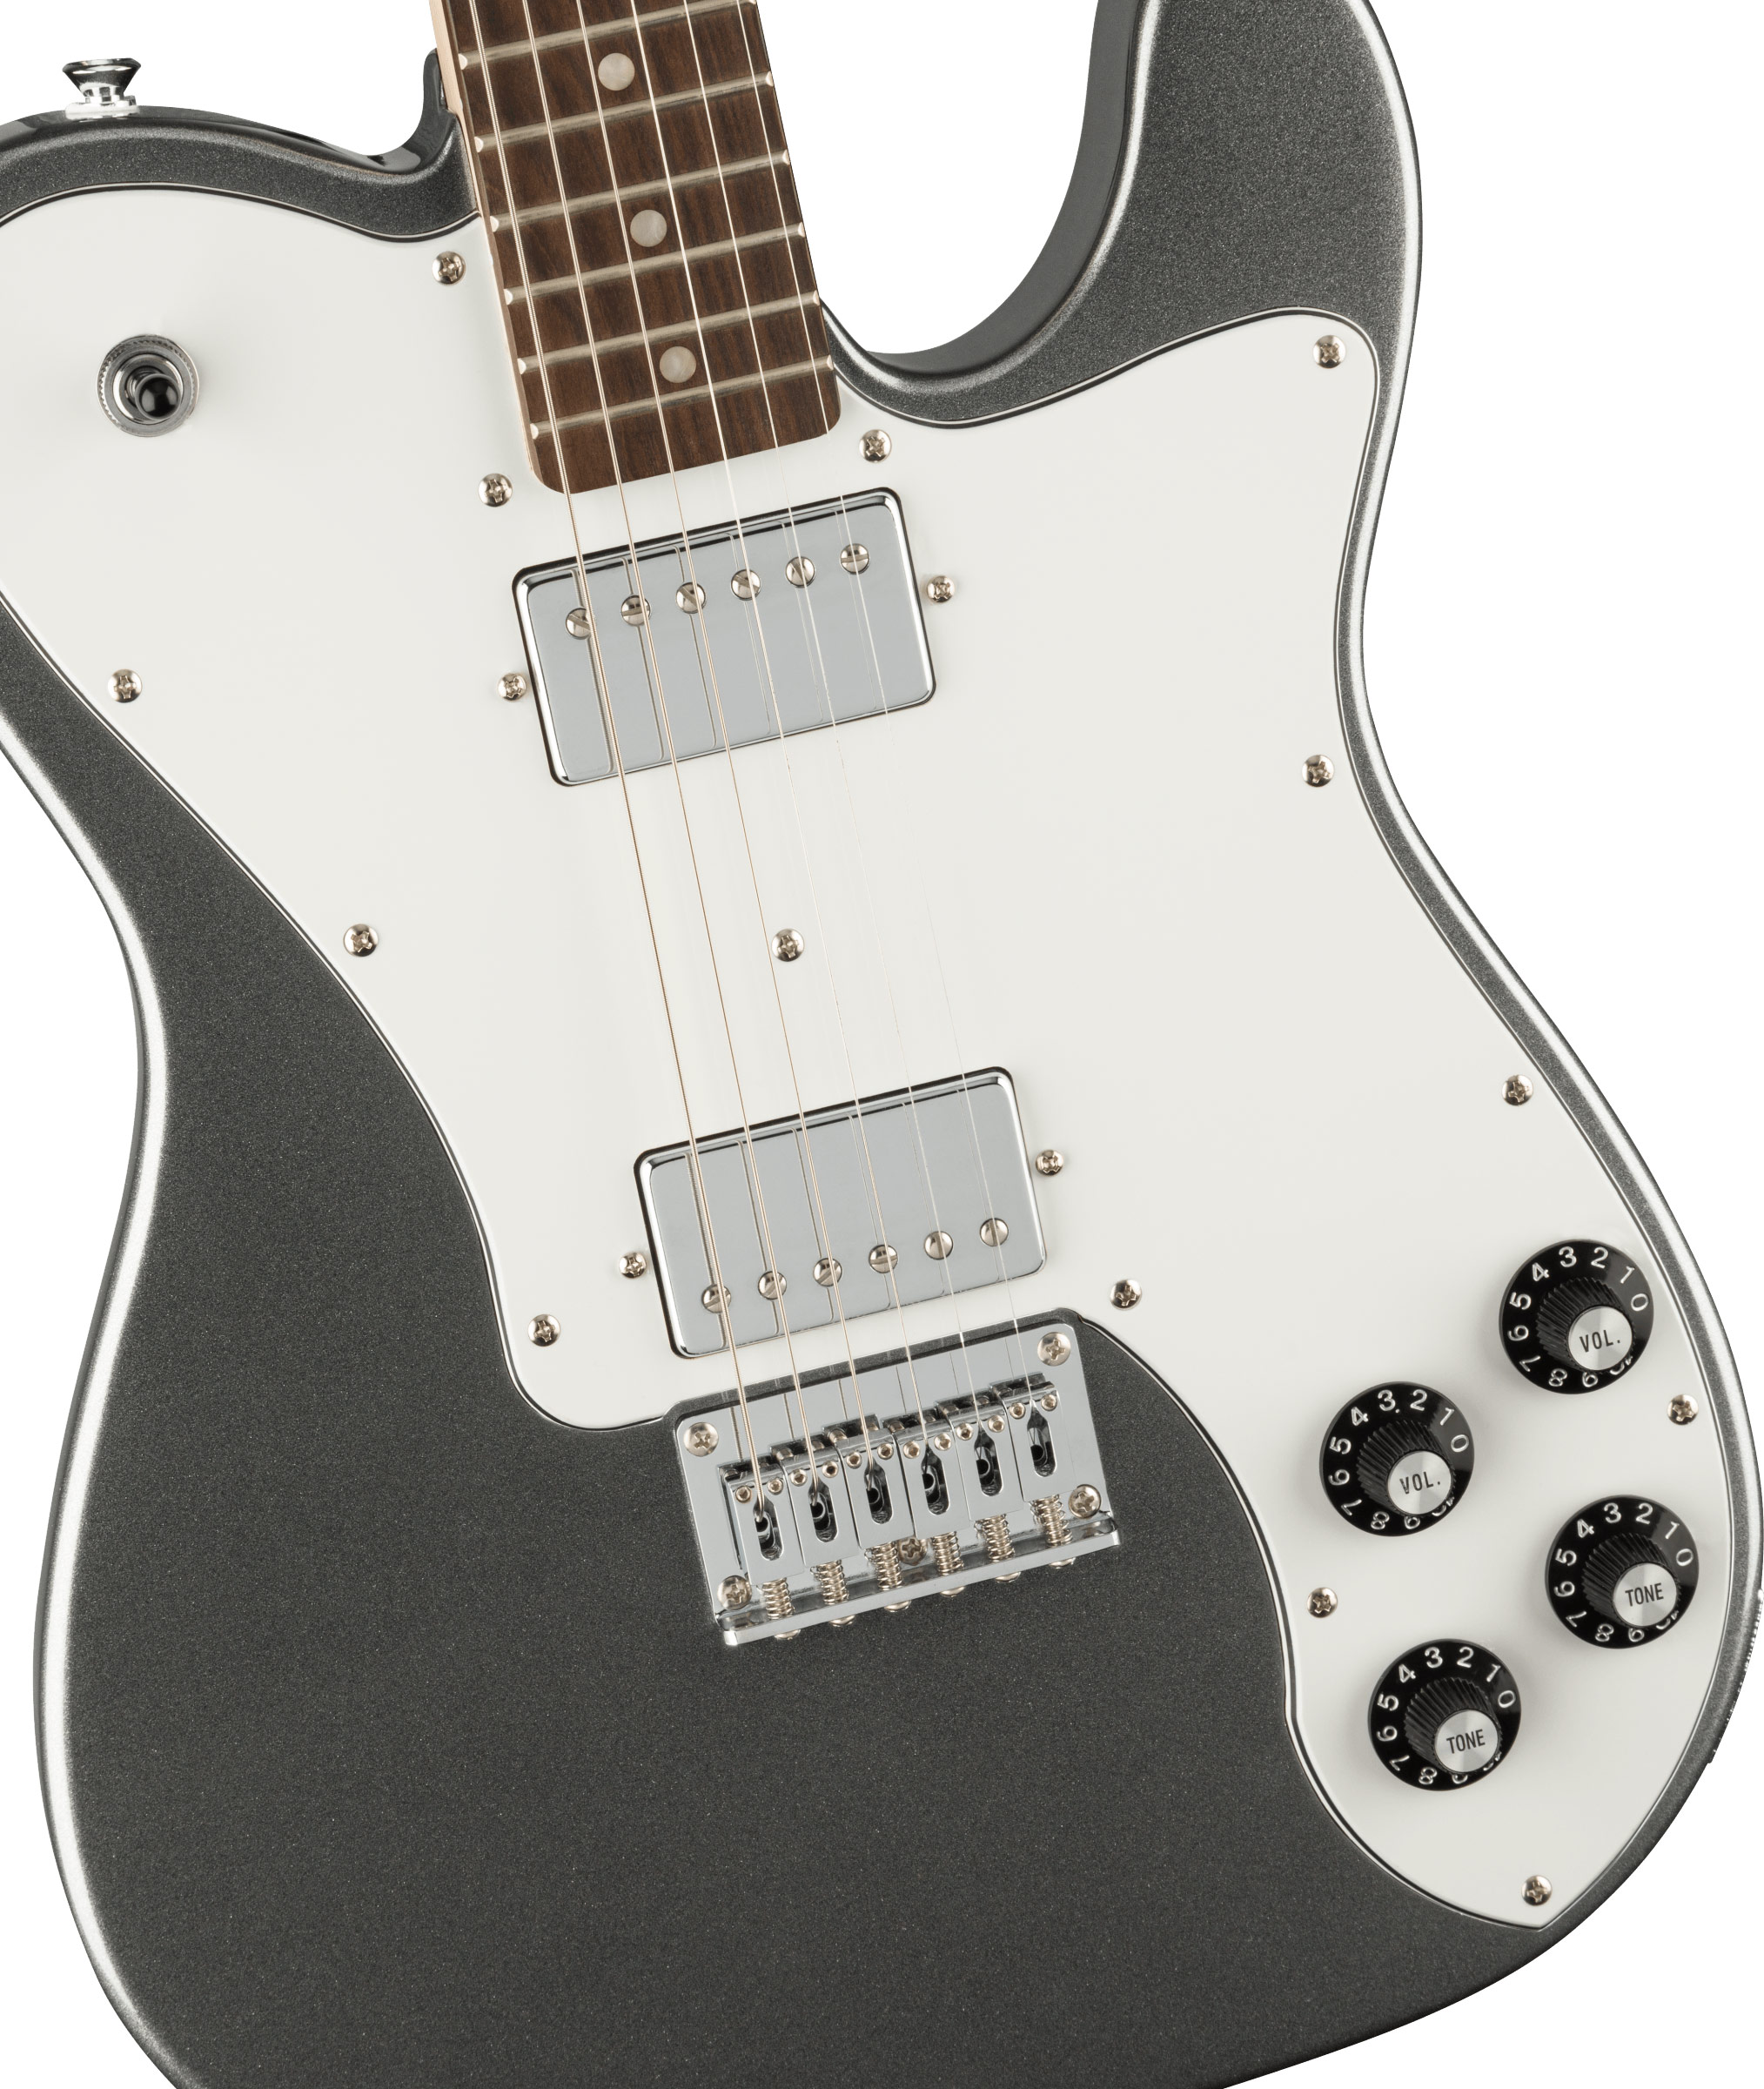 Squier Affinity Telecaster Deluxe Charcoal Frost Metallic 